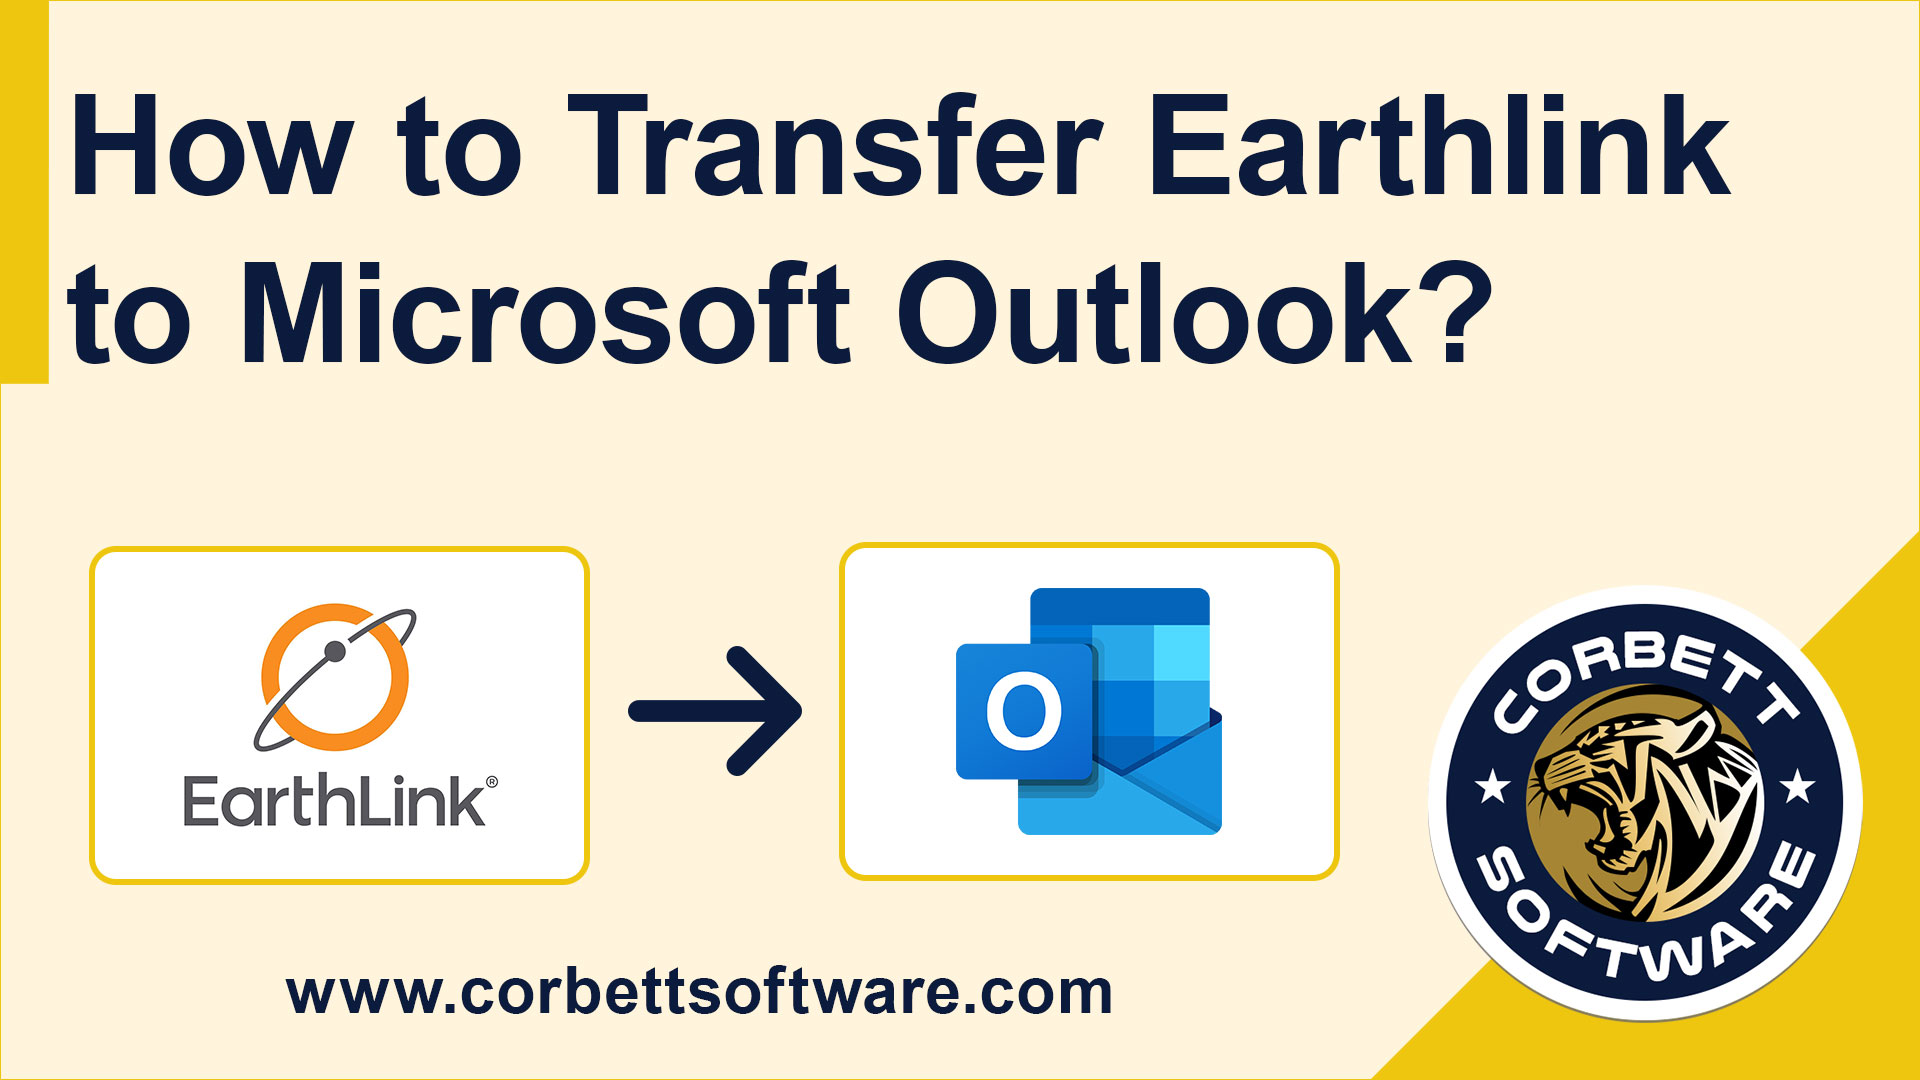 Transfer earthlink emails to Outook